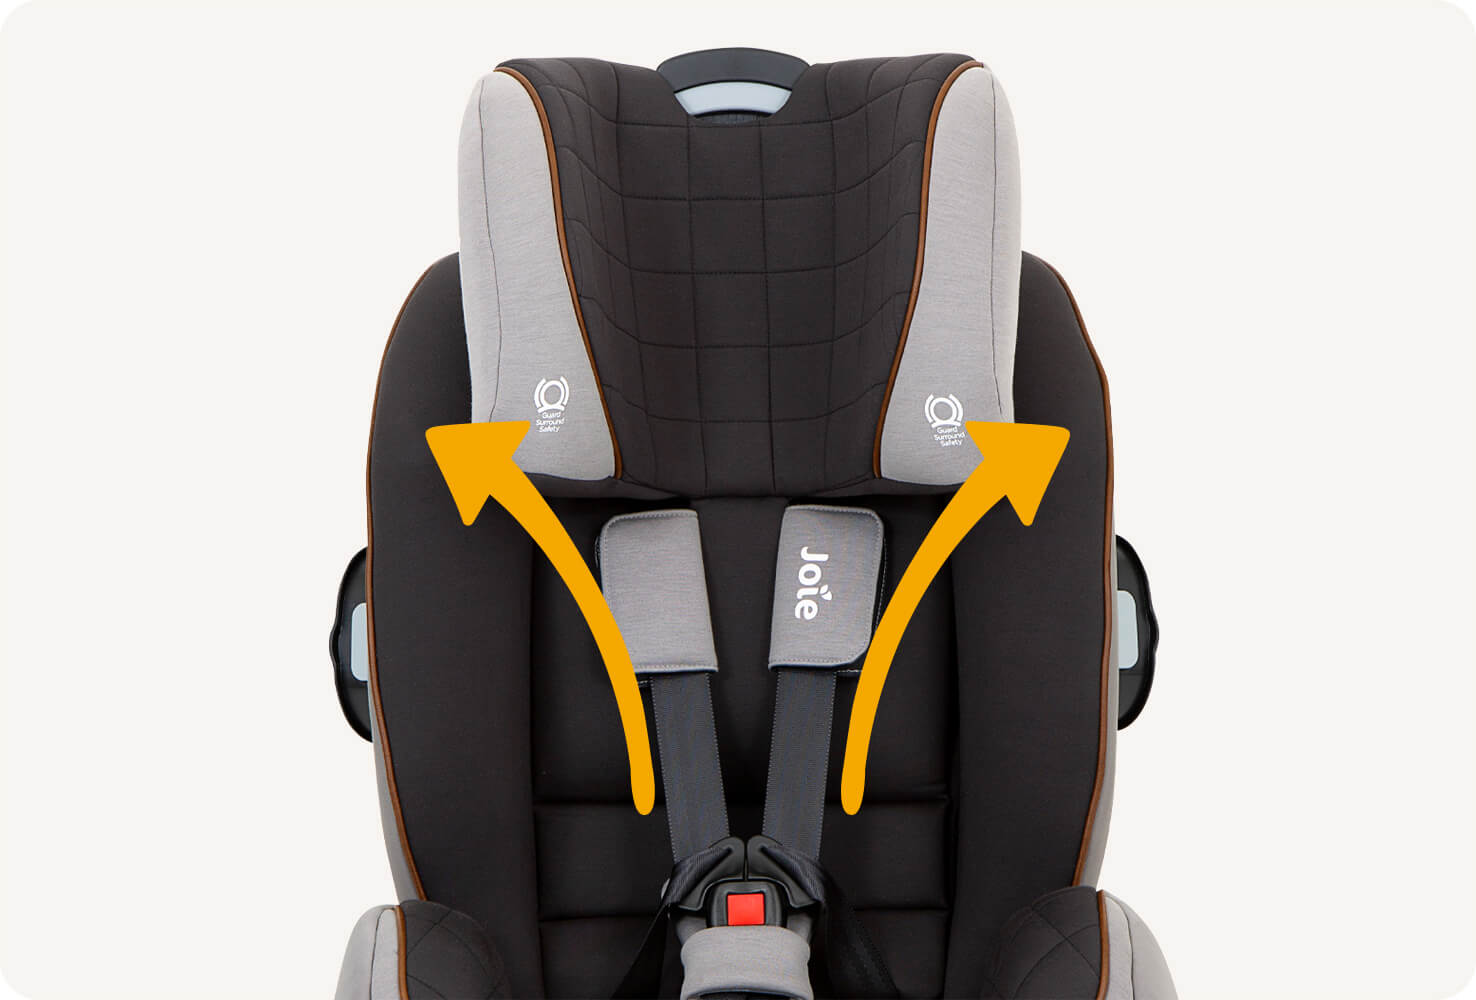  Zoomed in view of Joie armour fx car seat in black with gray details from the front view with arrows pointing up and out to show the headrest lifts to different positions. 